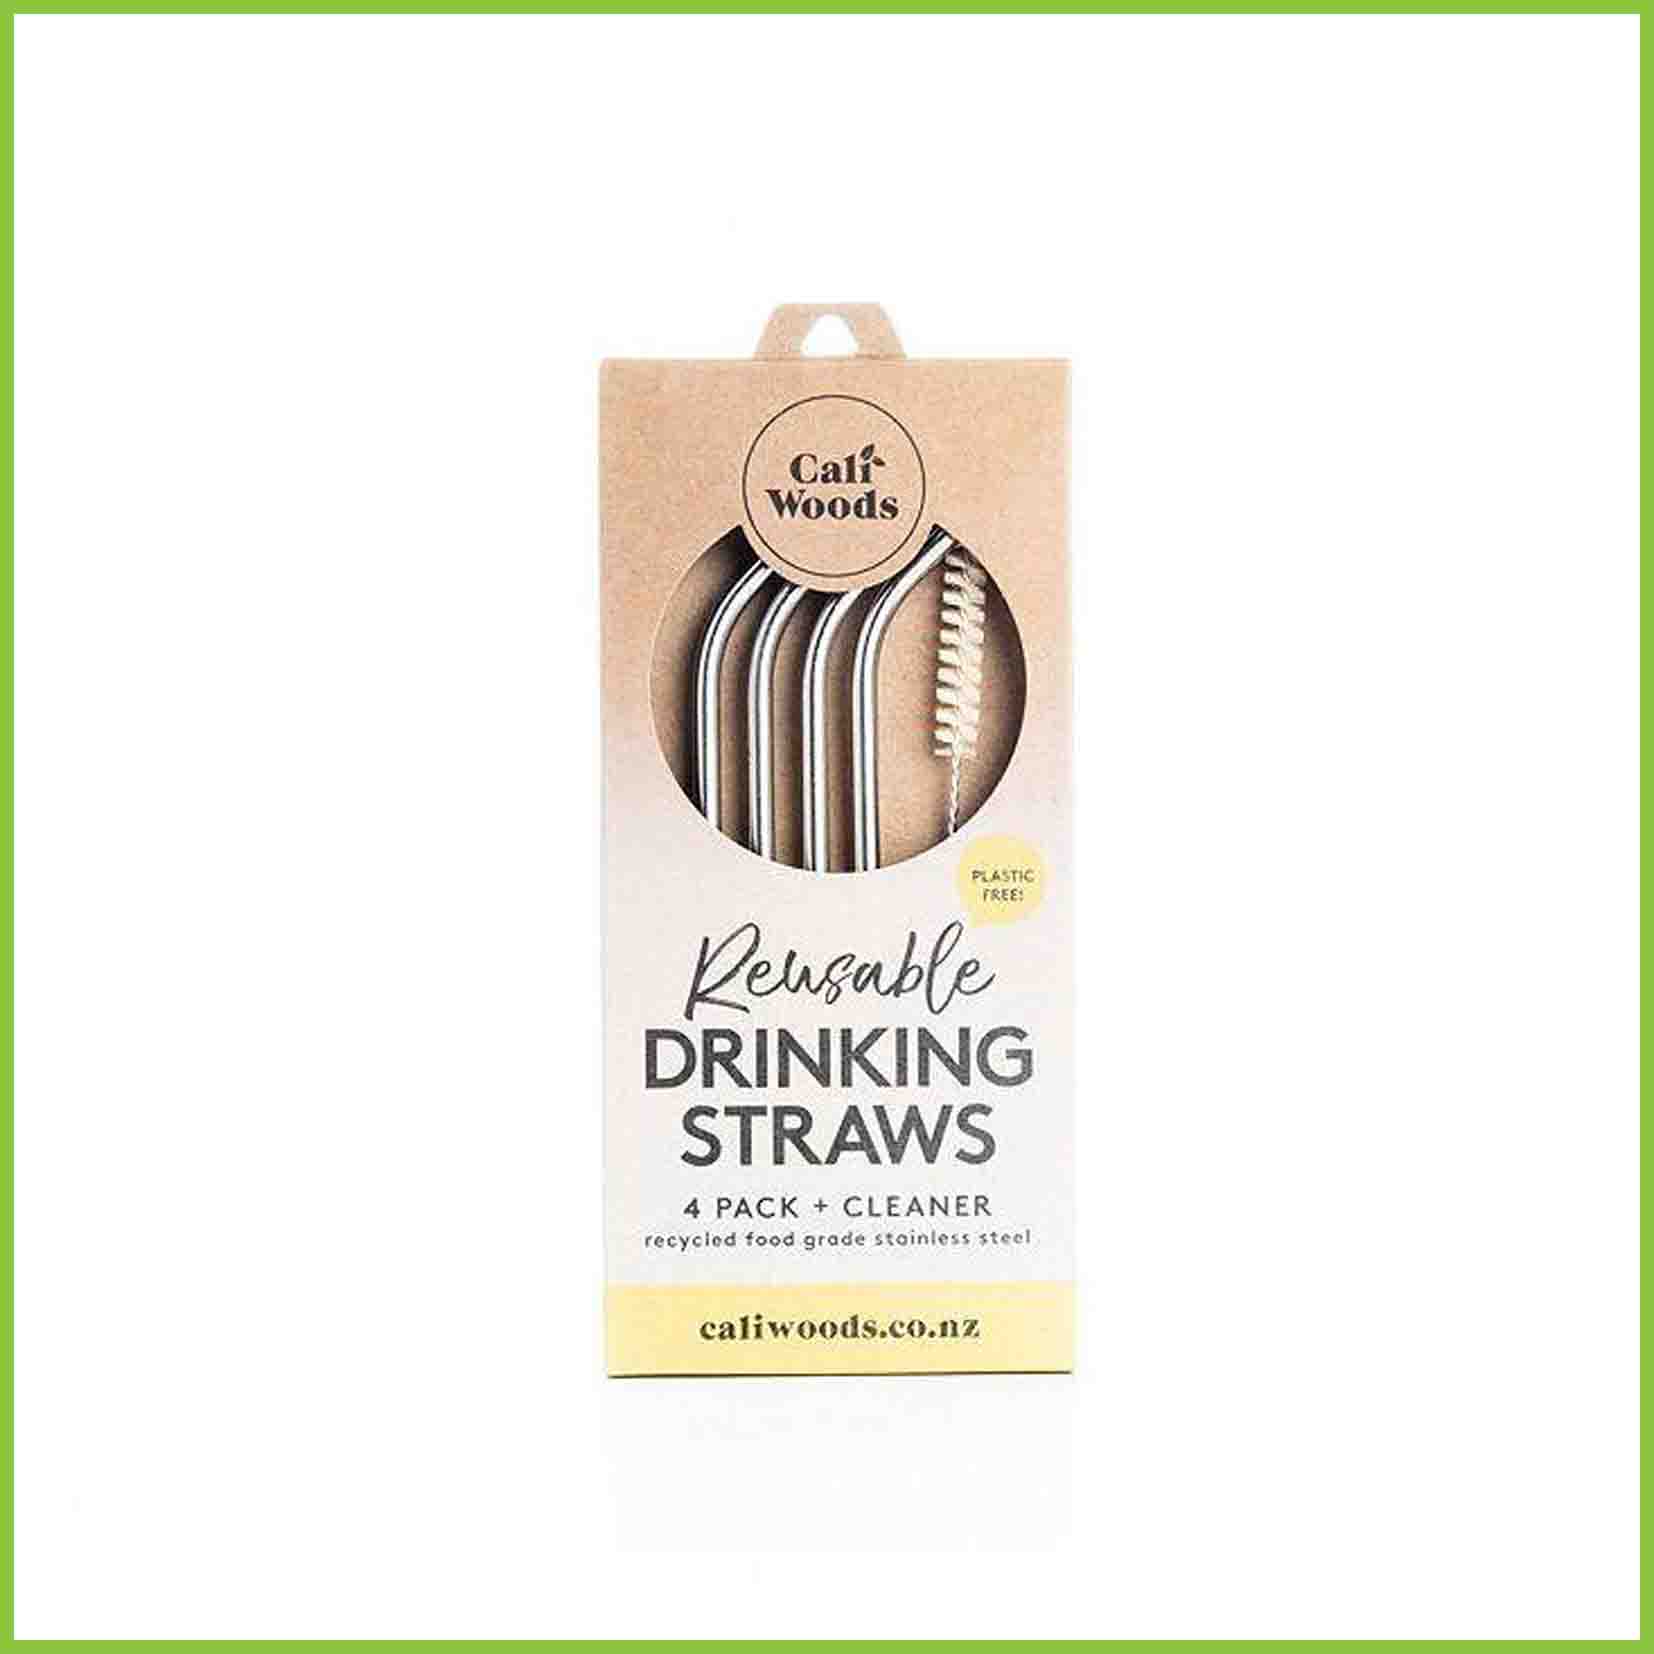 Caliwoods drinking straws in their packaging